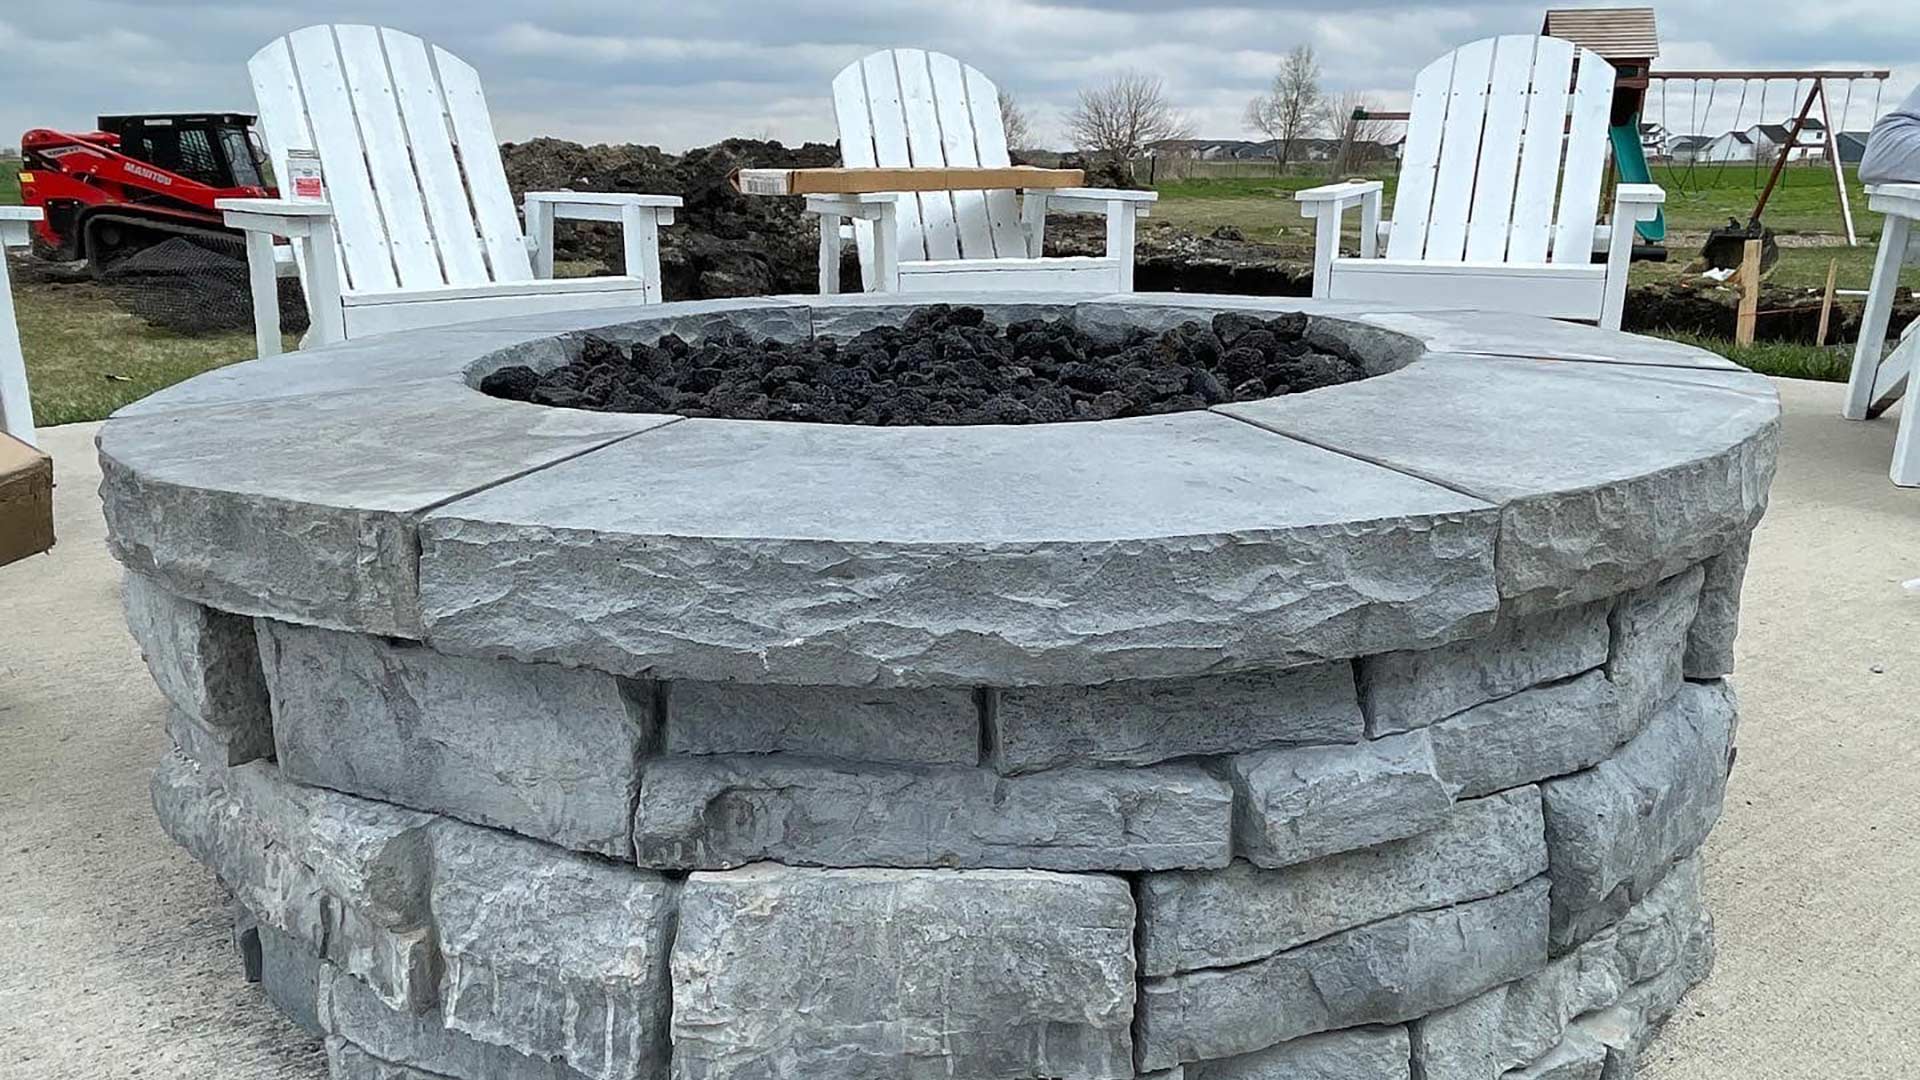 Fire pit installed over a patio in Bondurant, IA.